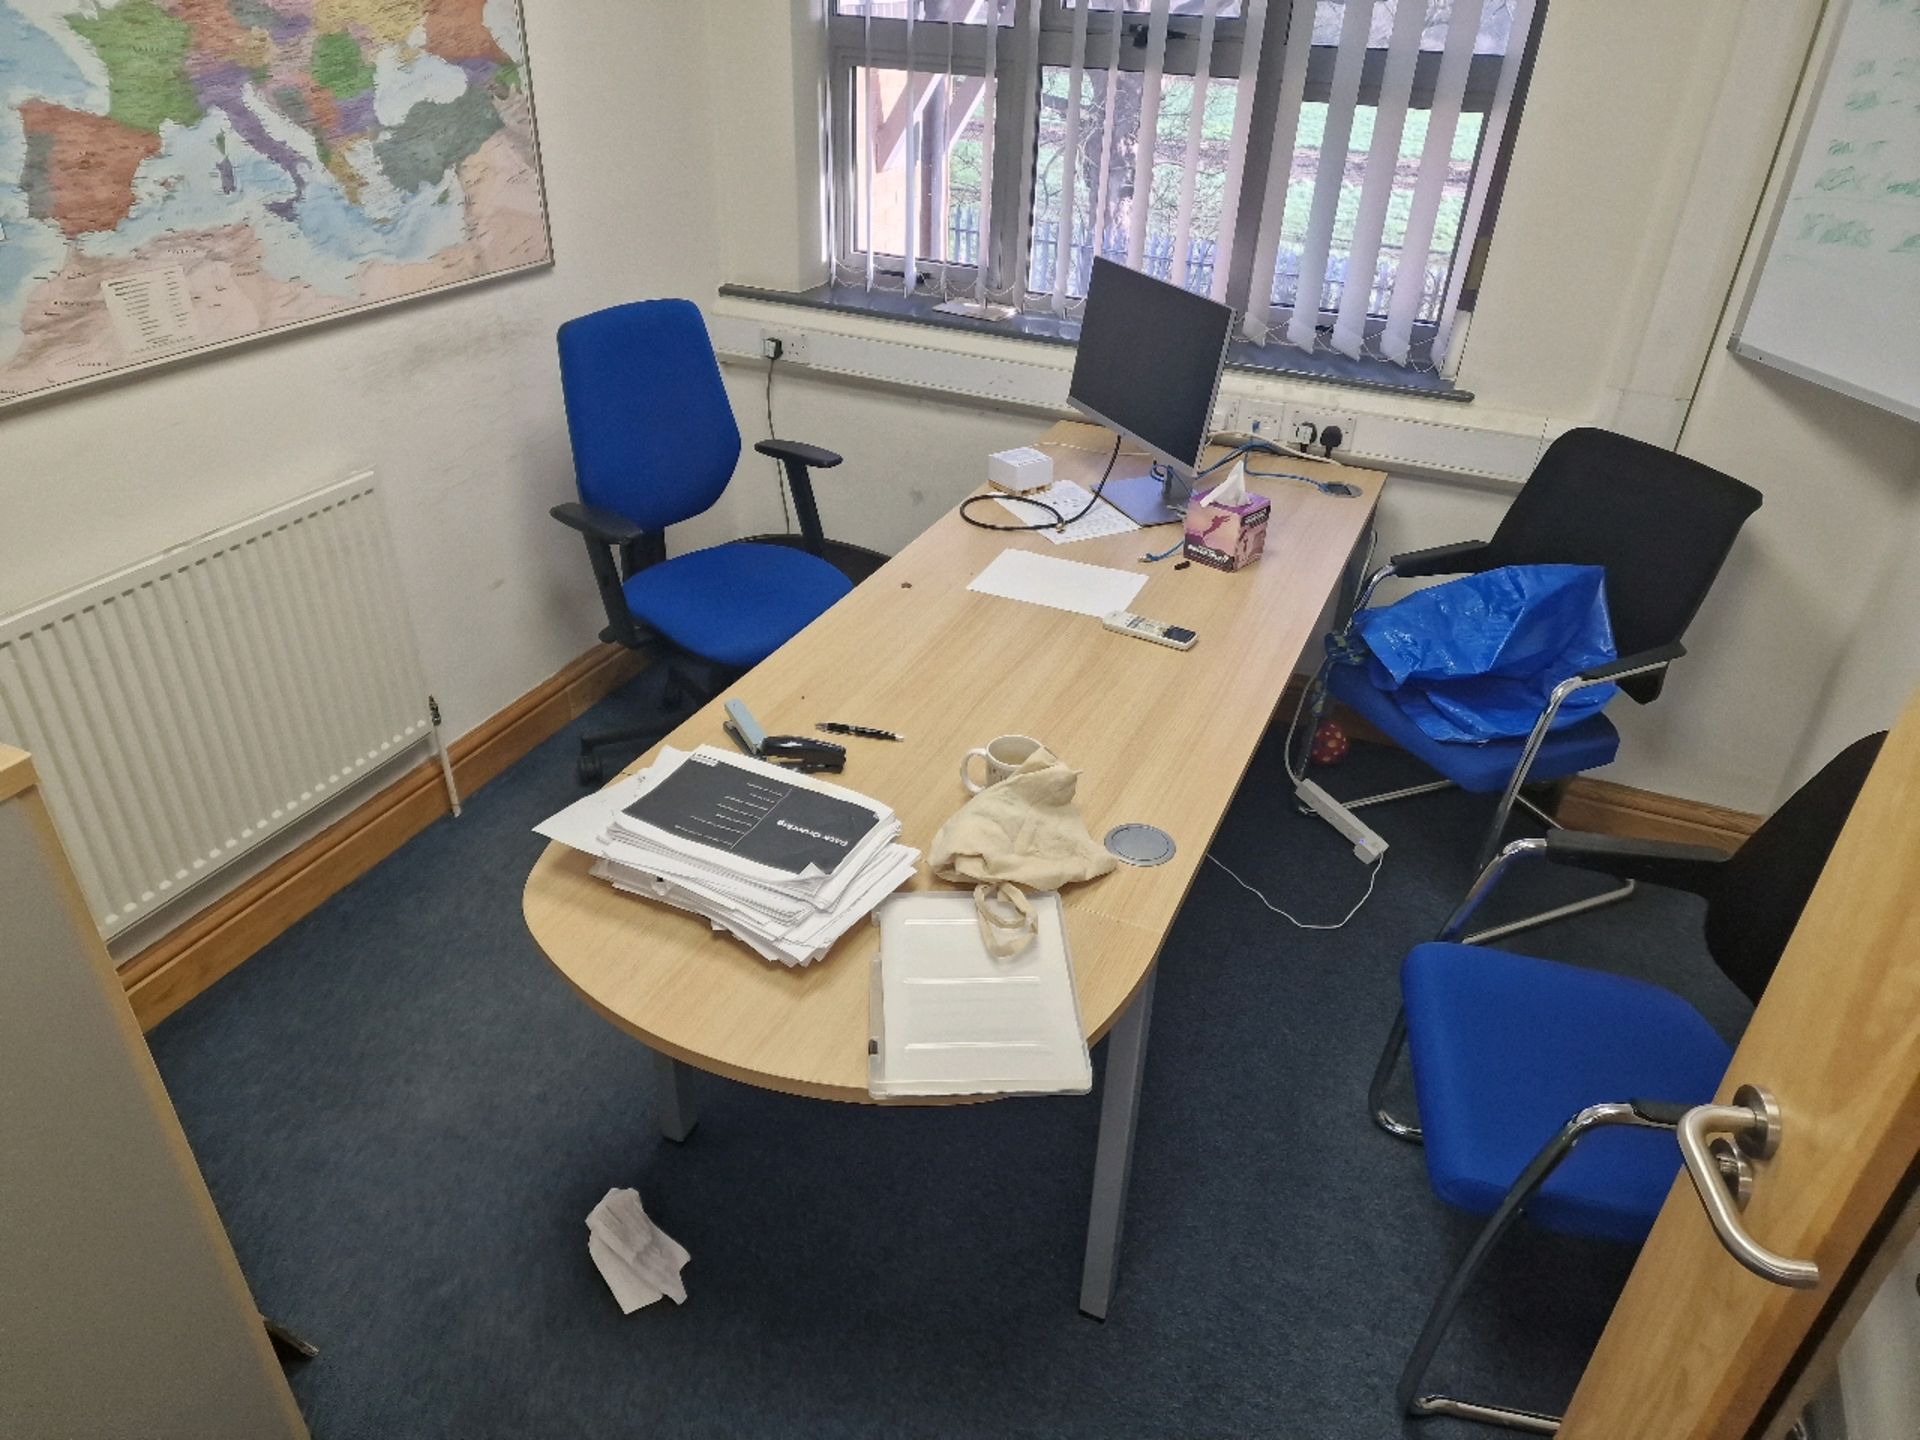 ref 121 - Office Contents